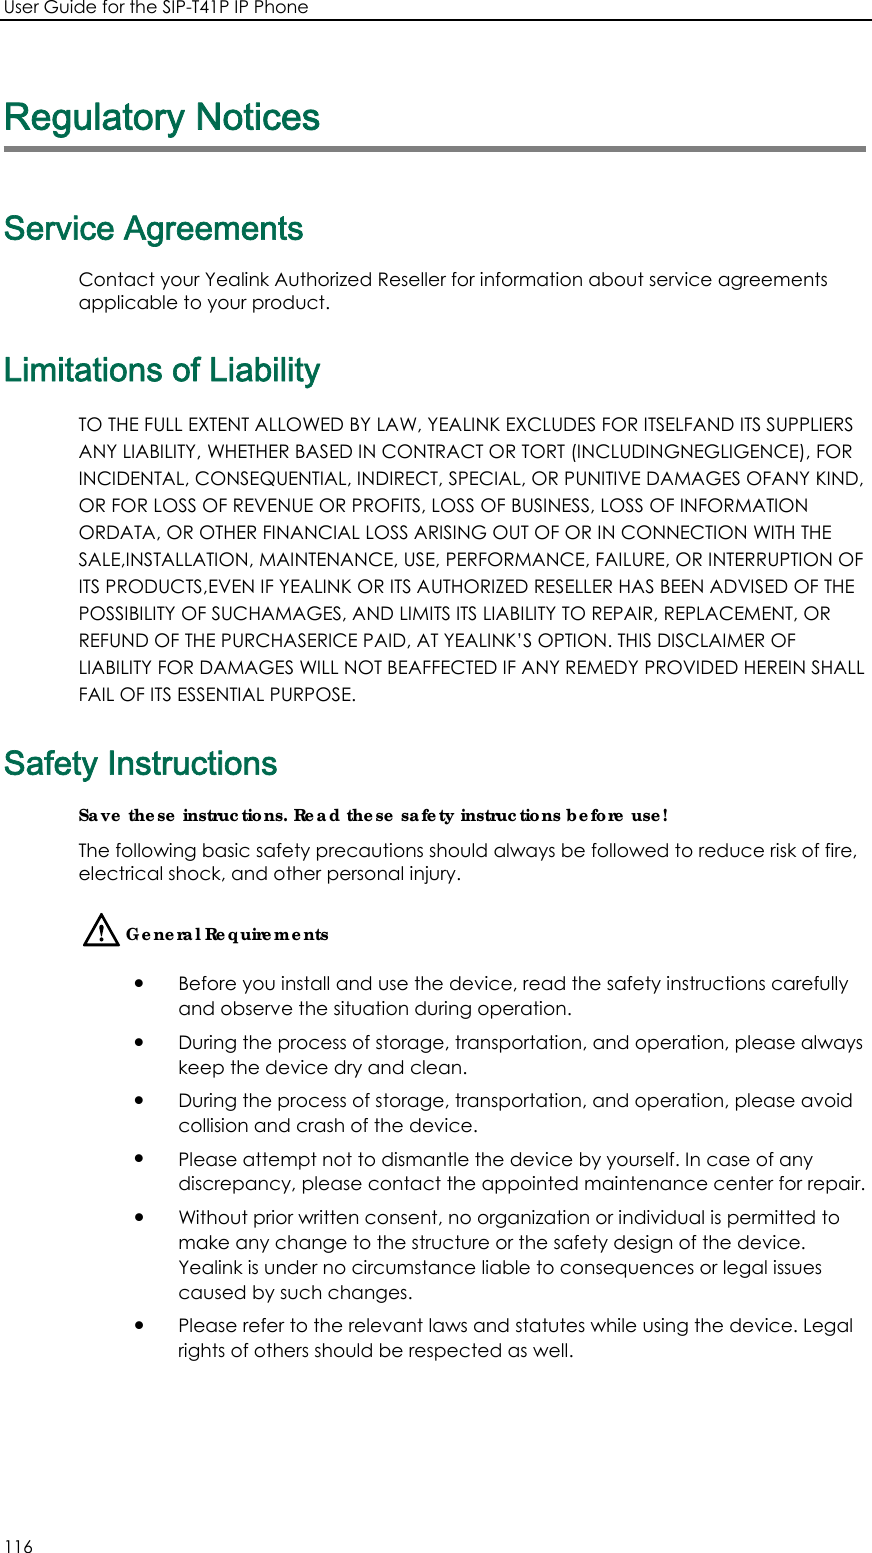 User Guide for the SIP-T41P IP Phone 116 Regulatory Notices Service Agreements Contact your Yealink Authorized Reseller for information about service agreements applicable to your product. Limitations of Liability TO THE FULL EXTENT ALLOWED BY LAW, YEALINK EXCLUDES FOR ITSELFAND ITS SUPPLIERS ANY LIABILITY, WHETHER BASED IN CONTRACT OR TORT (INCLUDINGNEGLIGENCE), FOR INCIDENTAL, CONSEQUENTIAL, INDIRECT, SPECIAL, OR PUNITIVE DAMAGES OFANY KIND, OR FOR LOSS OF REVENUE OR PROFITS, LOSS OF BUSINESS, LOSS OF INFORMATION ORDATA, OR OTHER FINANCIAL LOSS ARISING OUT OF OR IN CONNECTION WITH THE SALE,INSTALLATION, MAINTENANCE, USE, PERFORMANCE, FAILURE, OR INTERRUPTION OF ITS PRODUCTS,EVEN IF YEALINK OR ITS AUTHORIZED RESELLER HAS BEEN ADVISED OF THE POSSIBILITY OF SUCHAMAGES, AND LIMITS ITS LIABILITY TO REPAIR, REPLACEMENT, OR REFUND OF THE PURCHASERICE PAID, AT YEALINK’S OPTION. THIS DISCLAIMER OF LIABILITY FOR DAMAGES WILL NOT BEAFFECTED IF ANY REMEDY PROVIDED HEREIN SHALL FAIL OF ITS ESSENTIAL PURPOSE. Safety Instructions Save these instructions. Read these safety instructions before use! The following basic safety precautions should always be followed to reduce risk of fire, electrical shock, and other personal injury. General Requirements z Before you install and use the device, read the safety instructions carefully and observe the situation during operation. z During the process of storage, transportation, and operation, please always keep the device dry and clean. z During the process of storage, transportation, and operation, please avoid collision and crash of the device. z Please attempt not to dismantle the device by yourself. In case of any discrepancy, please contact the appointed maintenance center for repair. z Without prior written consent, no organization or individual is permitted to make any change to the structure or the safety design of the device. Yealink is under no circumstance liable to consequences or legal issues caused by such changes. z Please refer to the relevant laws and statutes while using the device. Legal rights of others should be respected as well.   